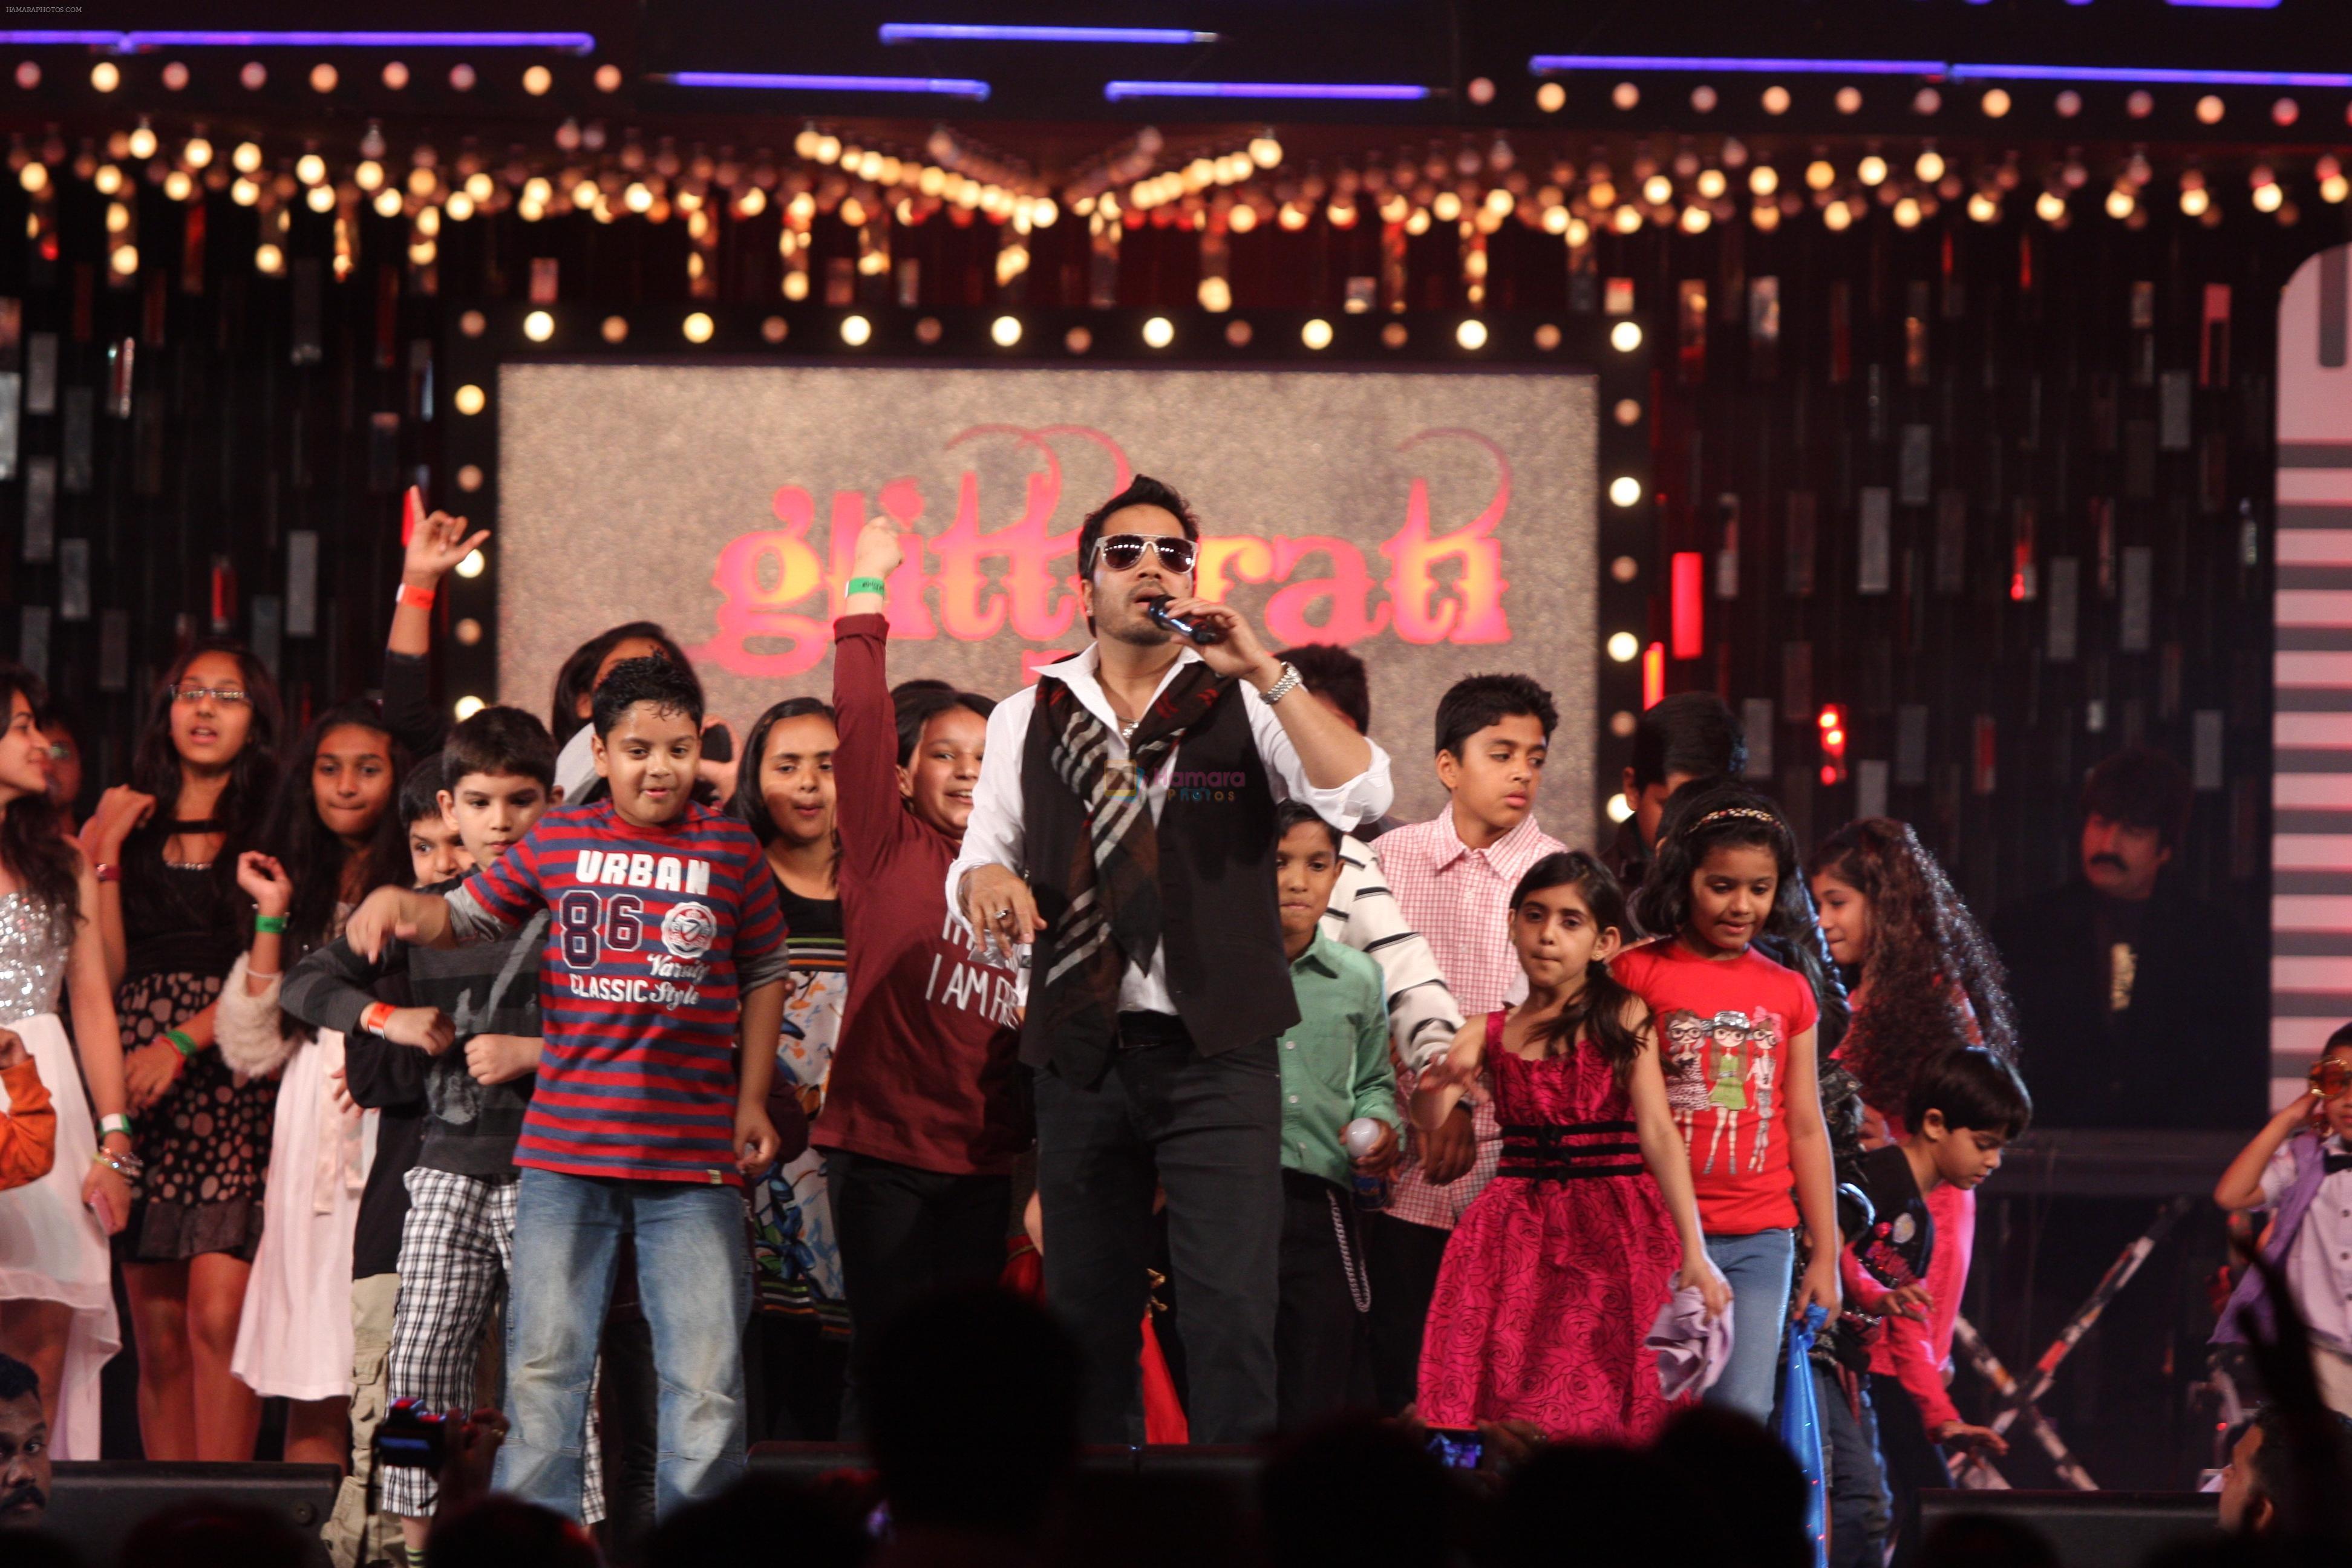 Mika Singh perform for New Years on 31st Dec 2012